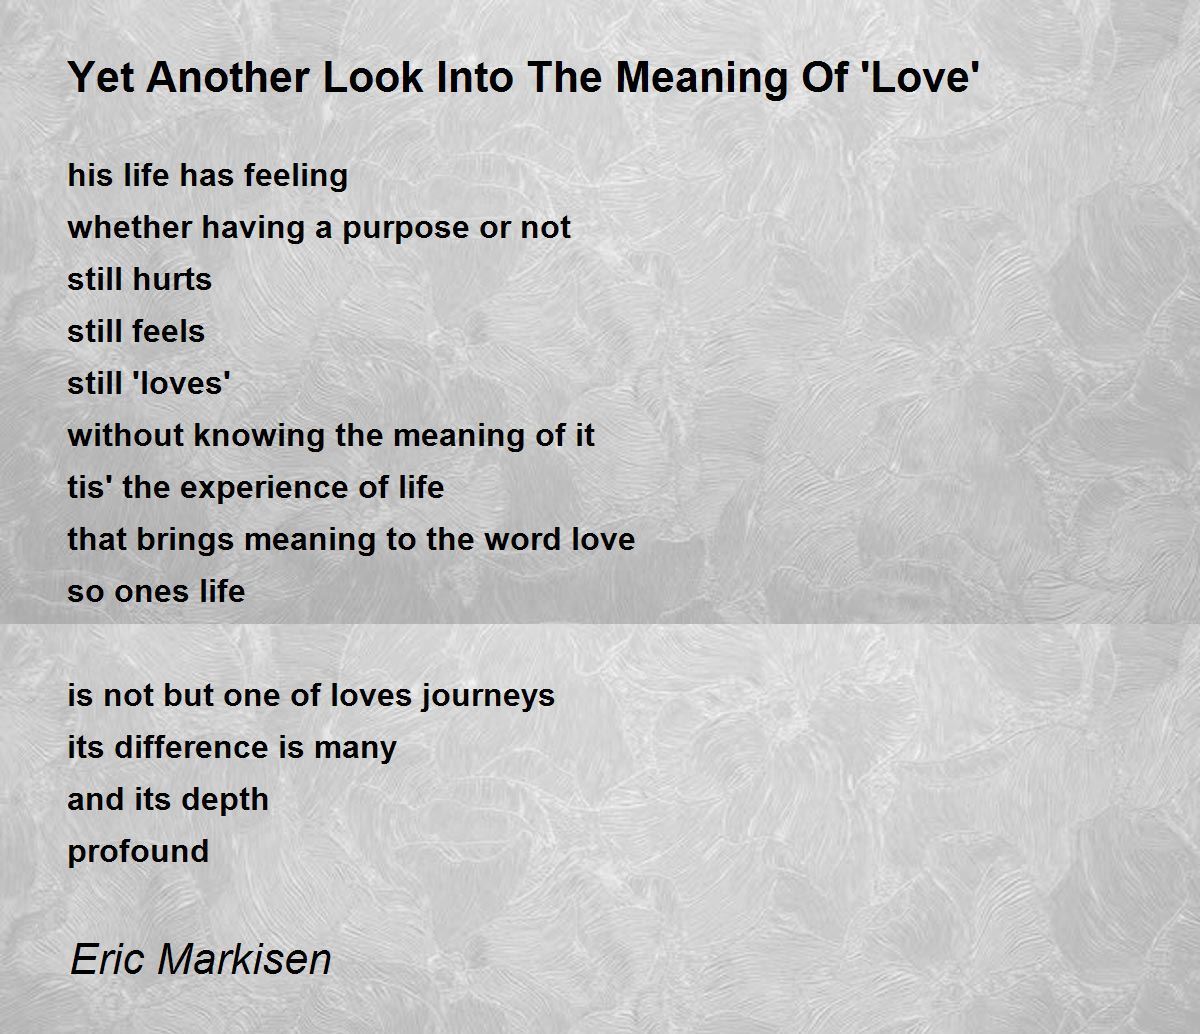 Look into meaning